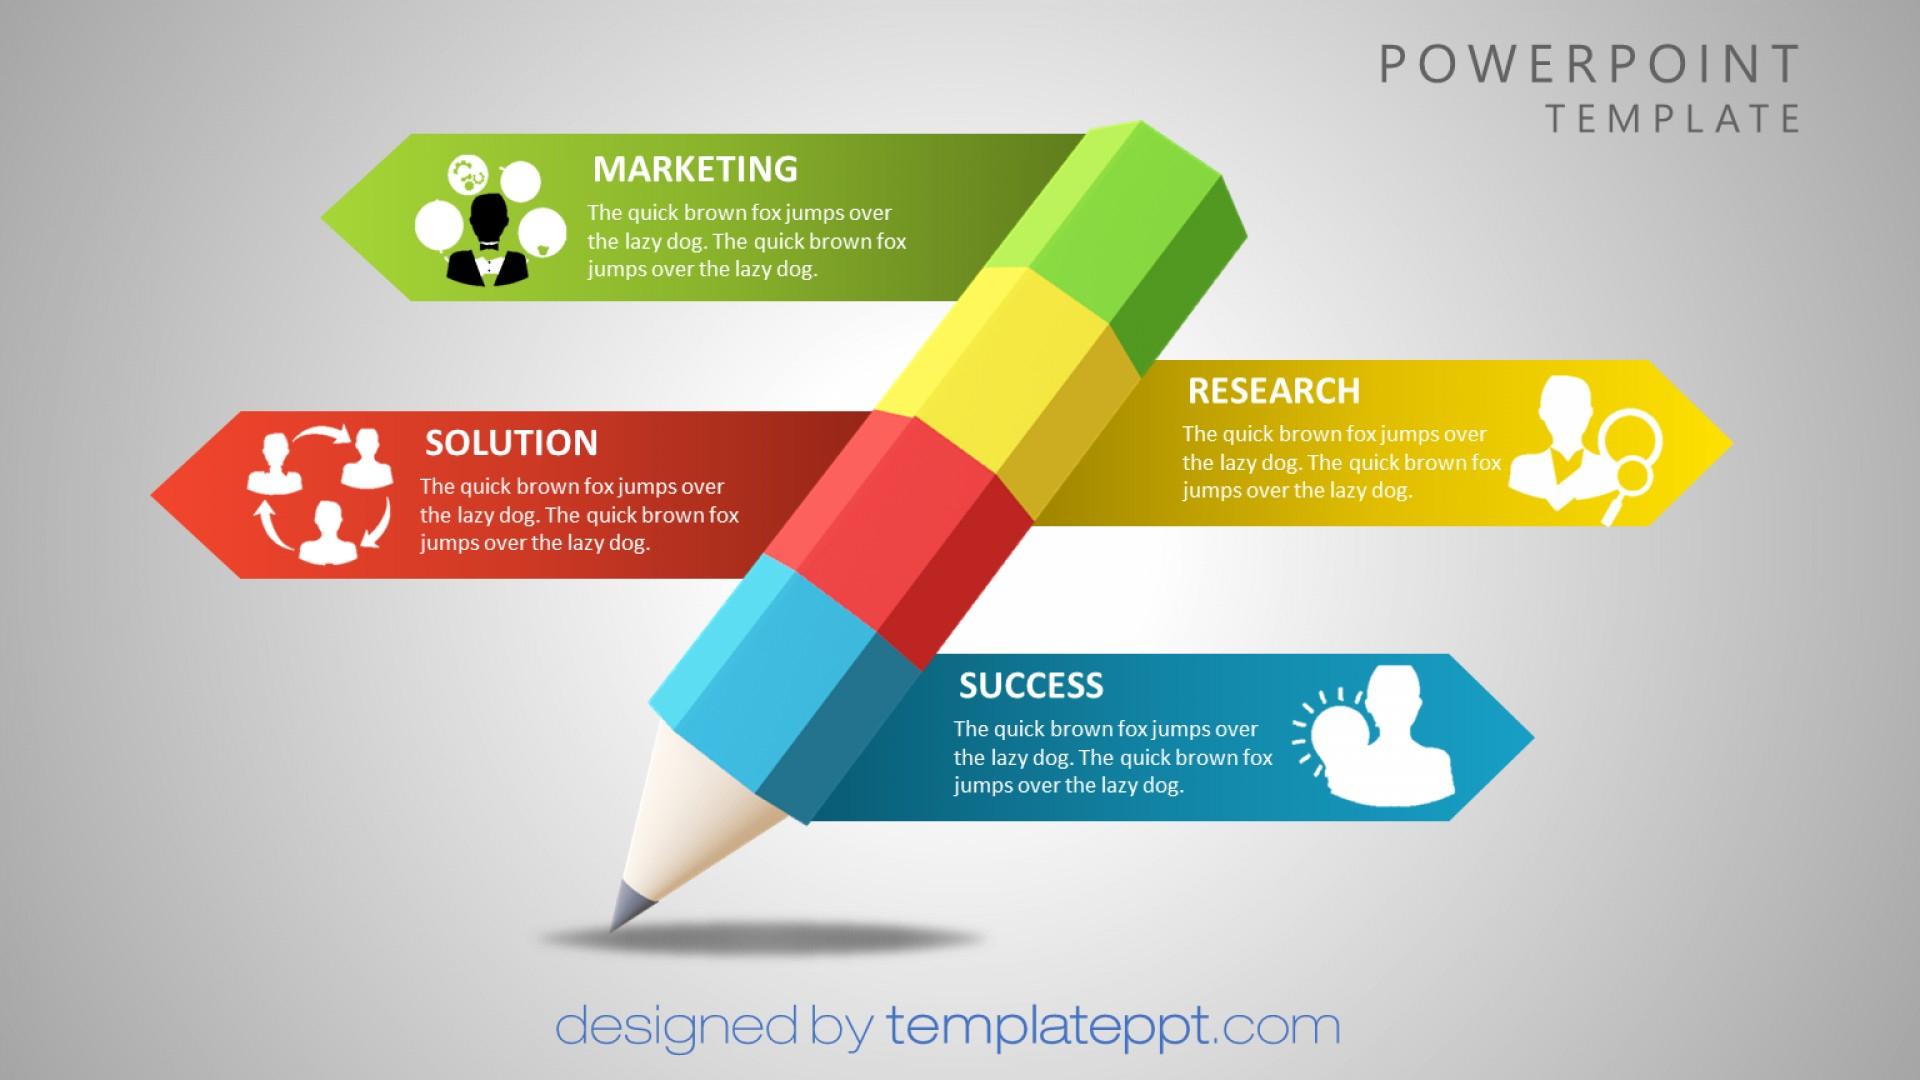 Download Template Powerpoint 2007 Free Templates Themes Throughout Powerpoint 2007 Template Free Download